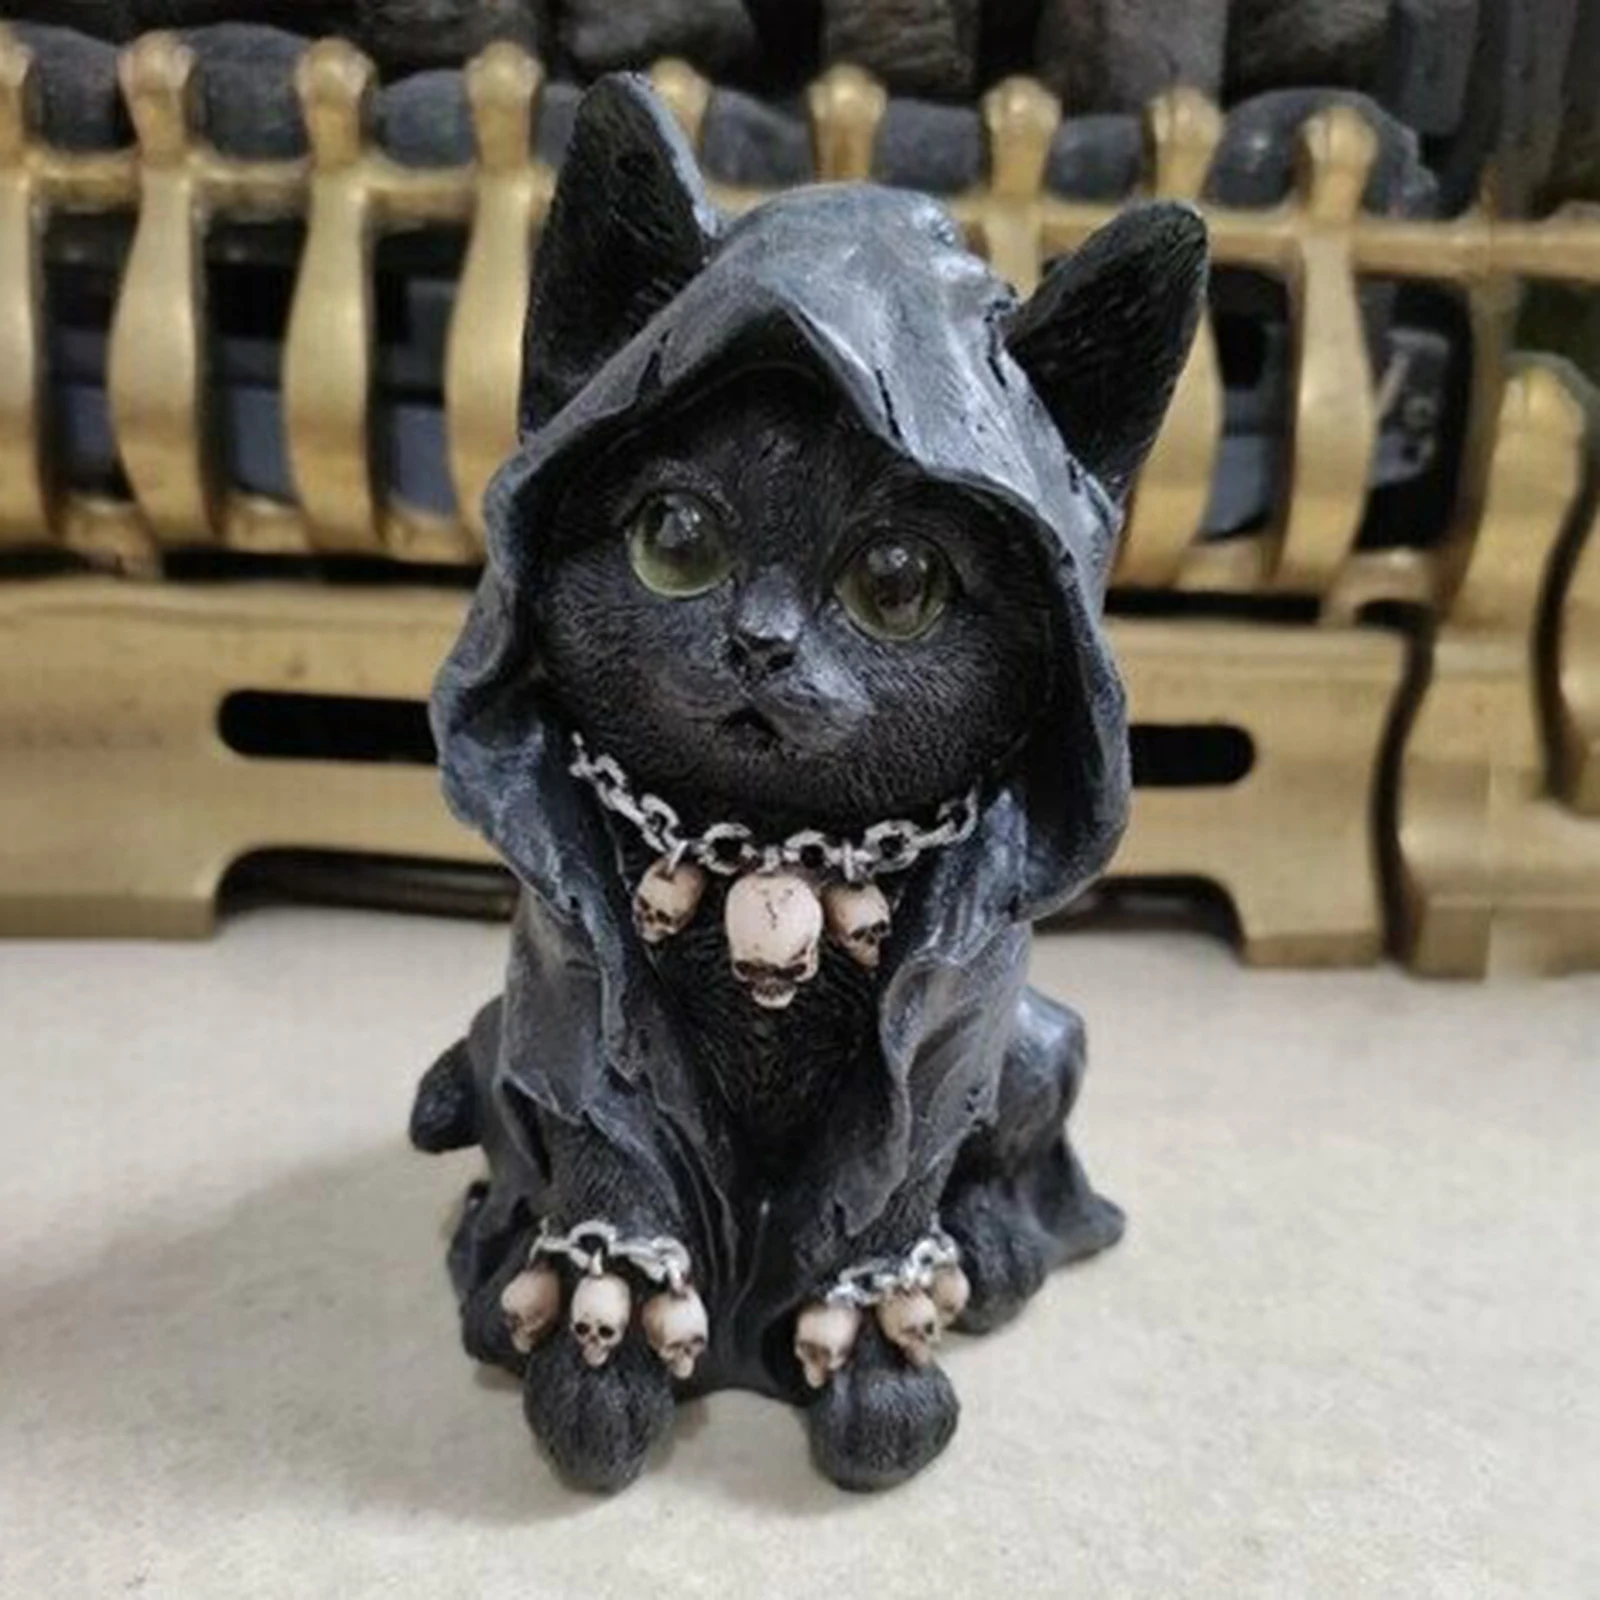 

Resin Black Cat with Cloak Statue Cute Kitty with Skull Necklace Cat Figurine Ornaments for Home Cawaii Decoration for Bedroom